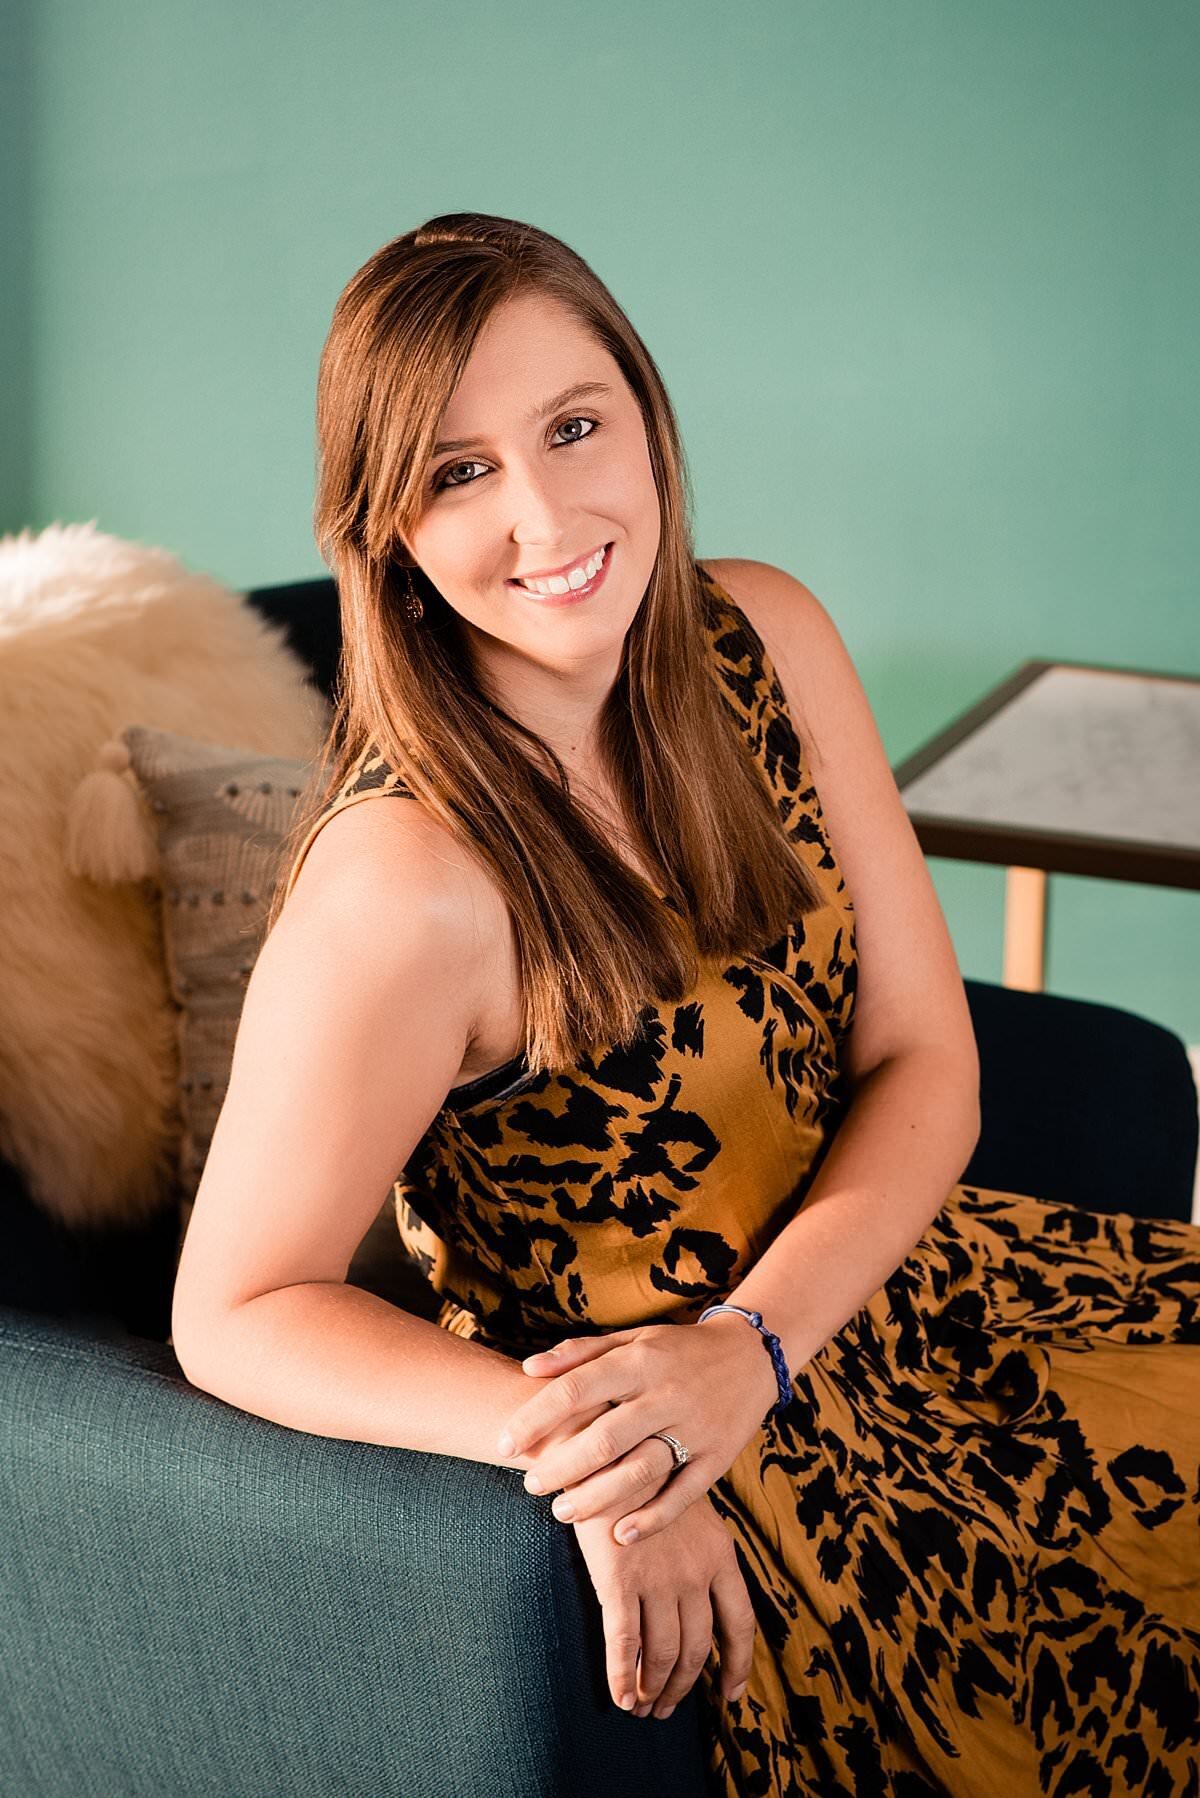 Headshot photo of boss babe smiling at camera sitting on a chair